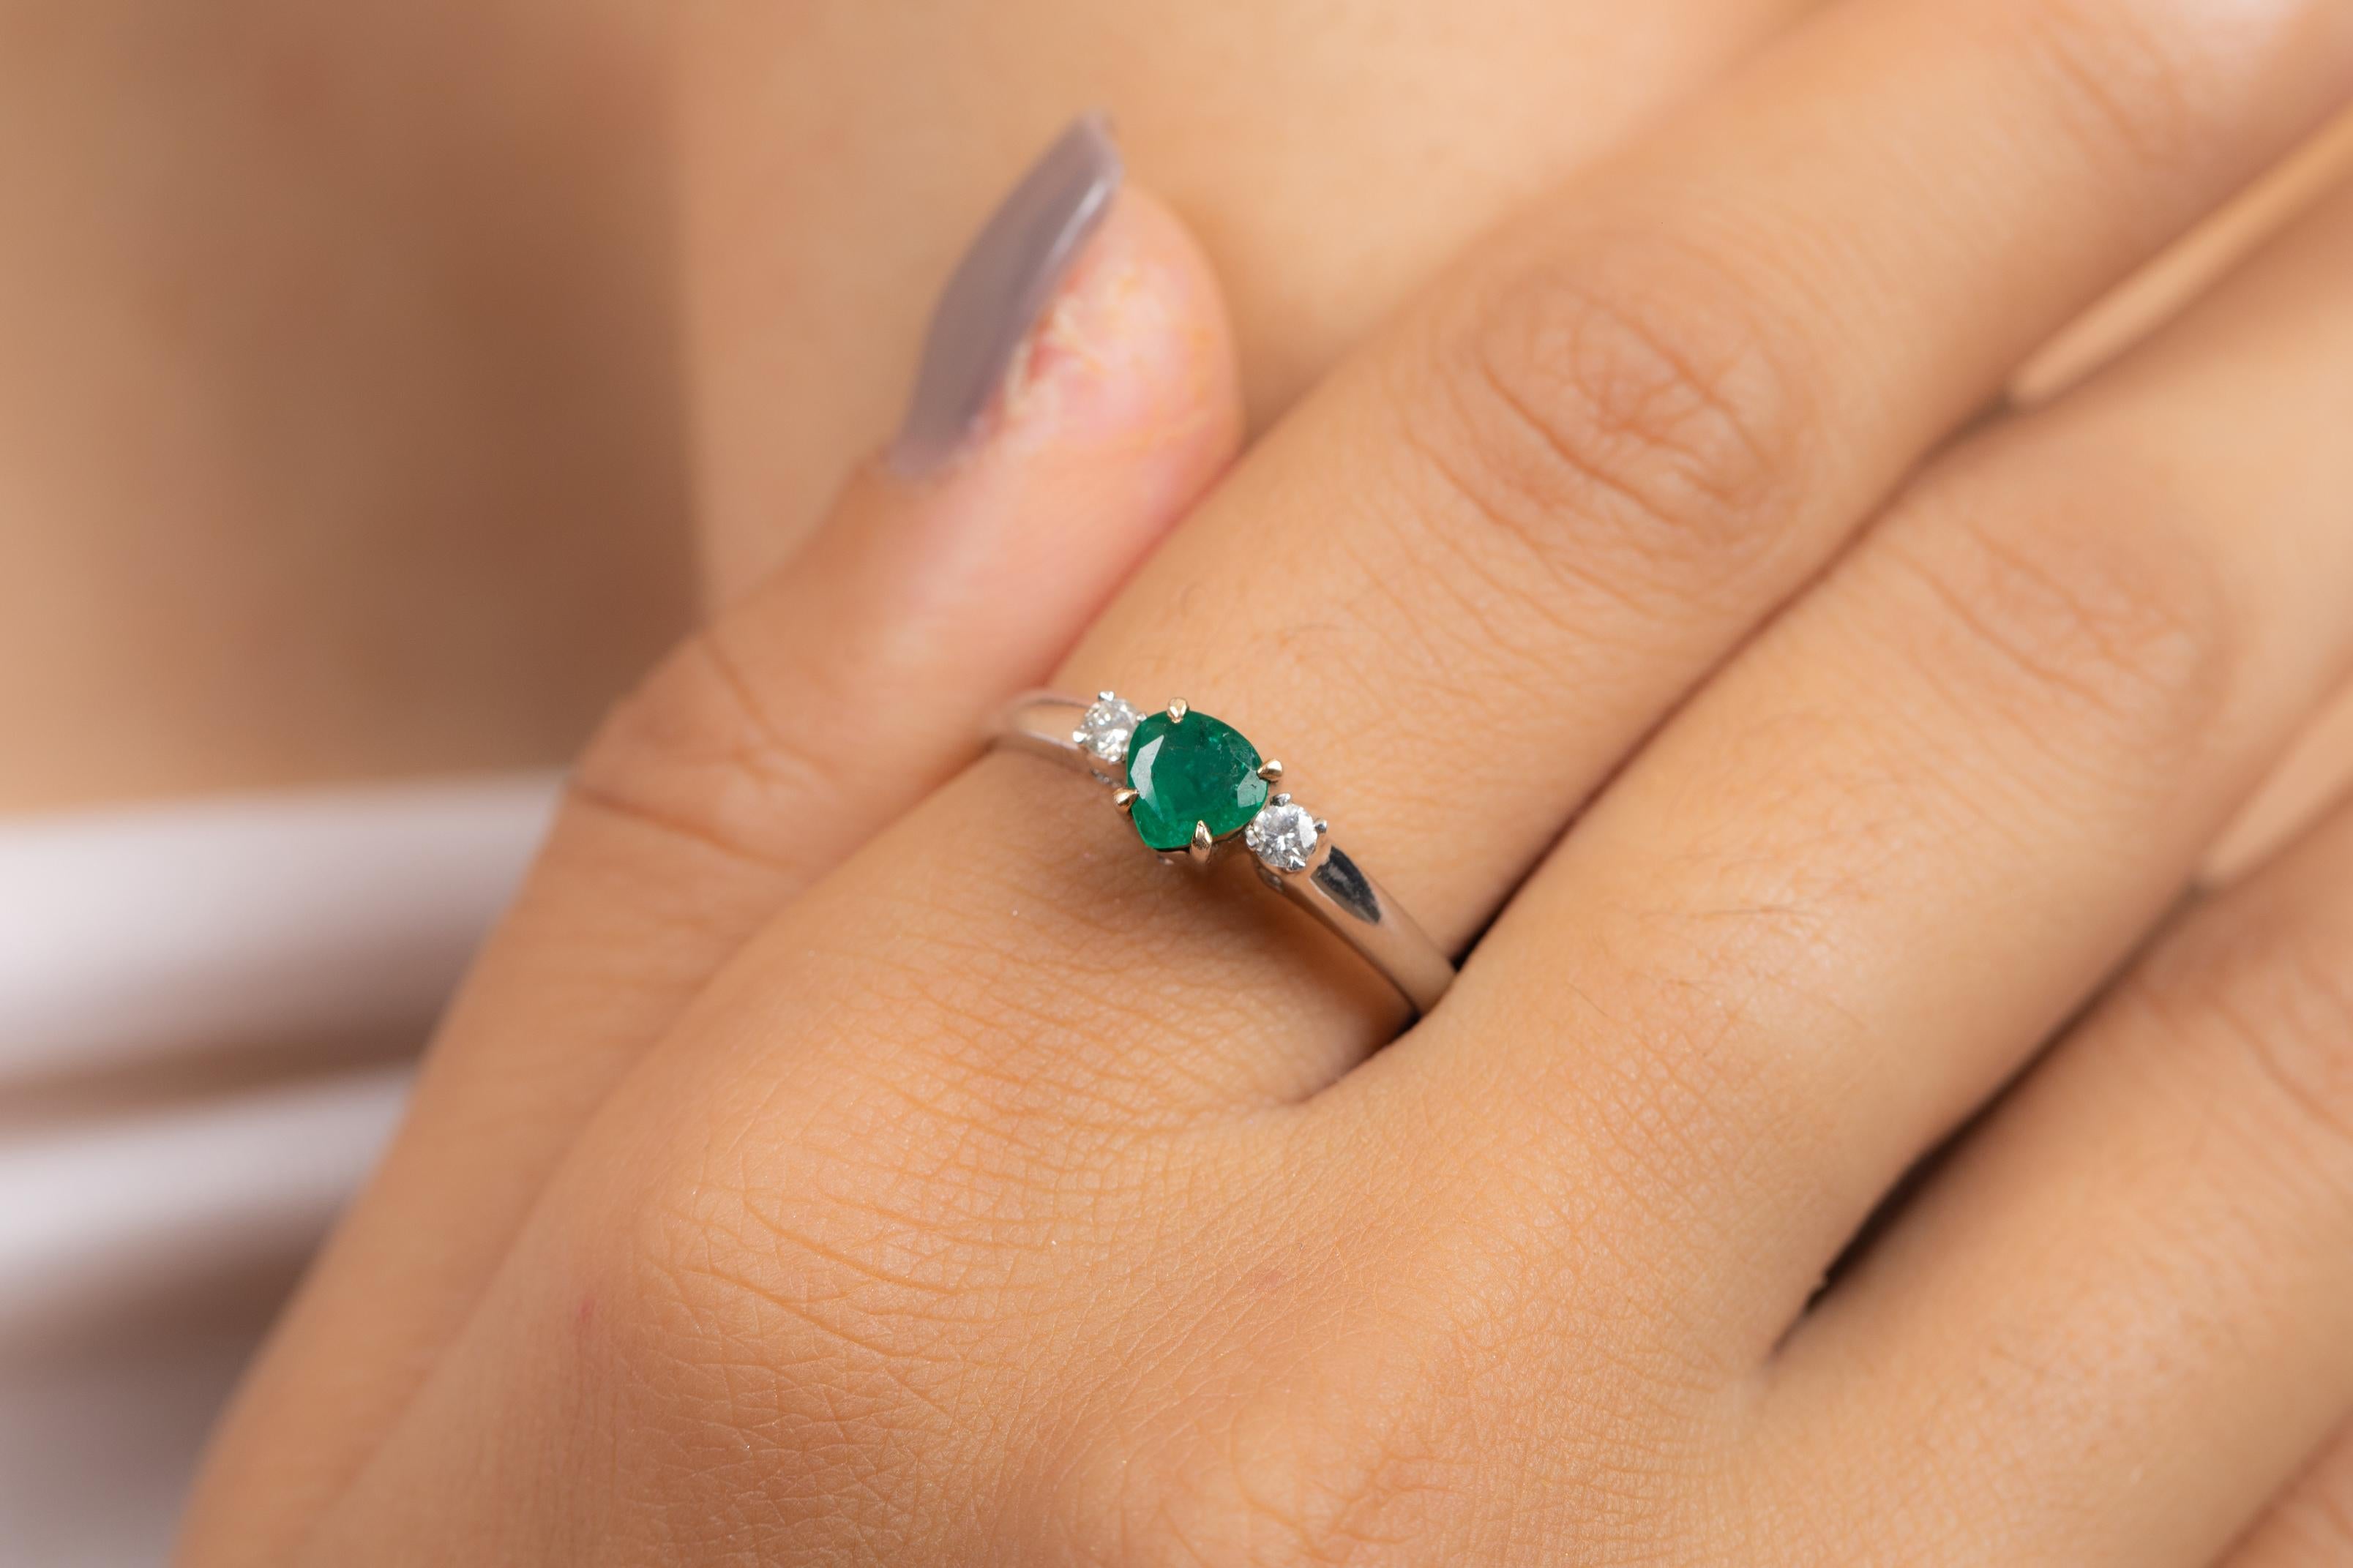 For Sale:  18k Solid White Gold Emerald Ring with Diamonds 4